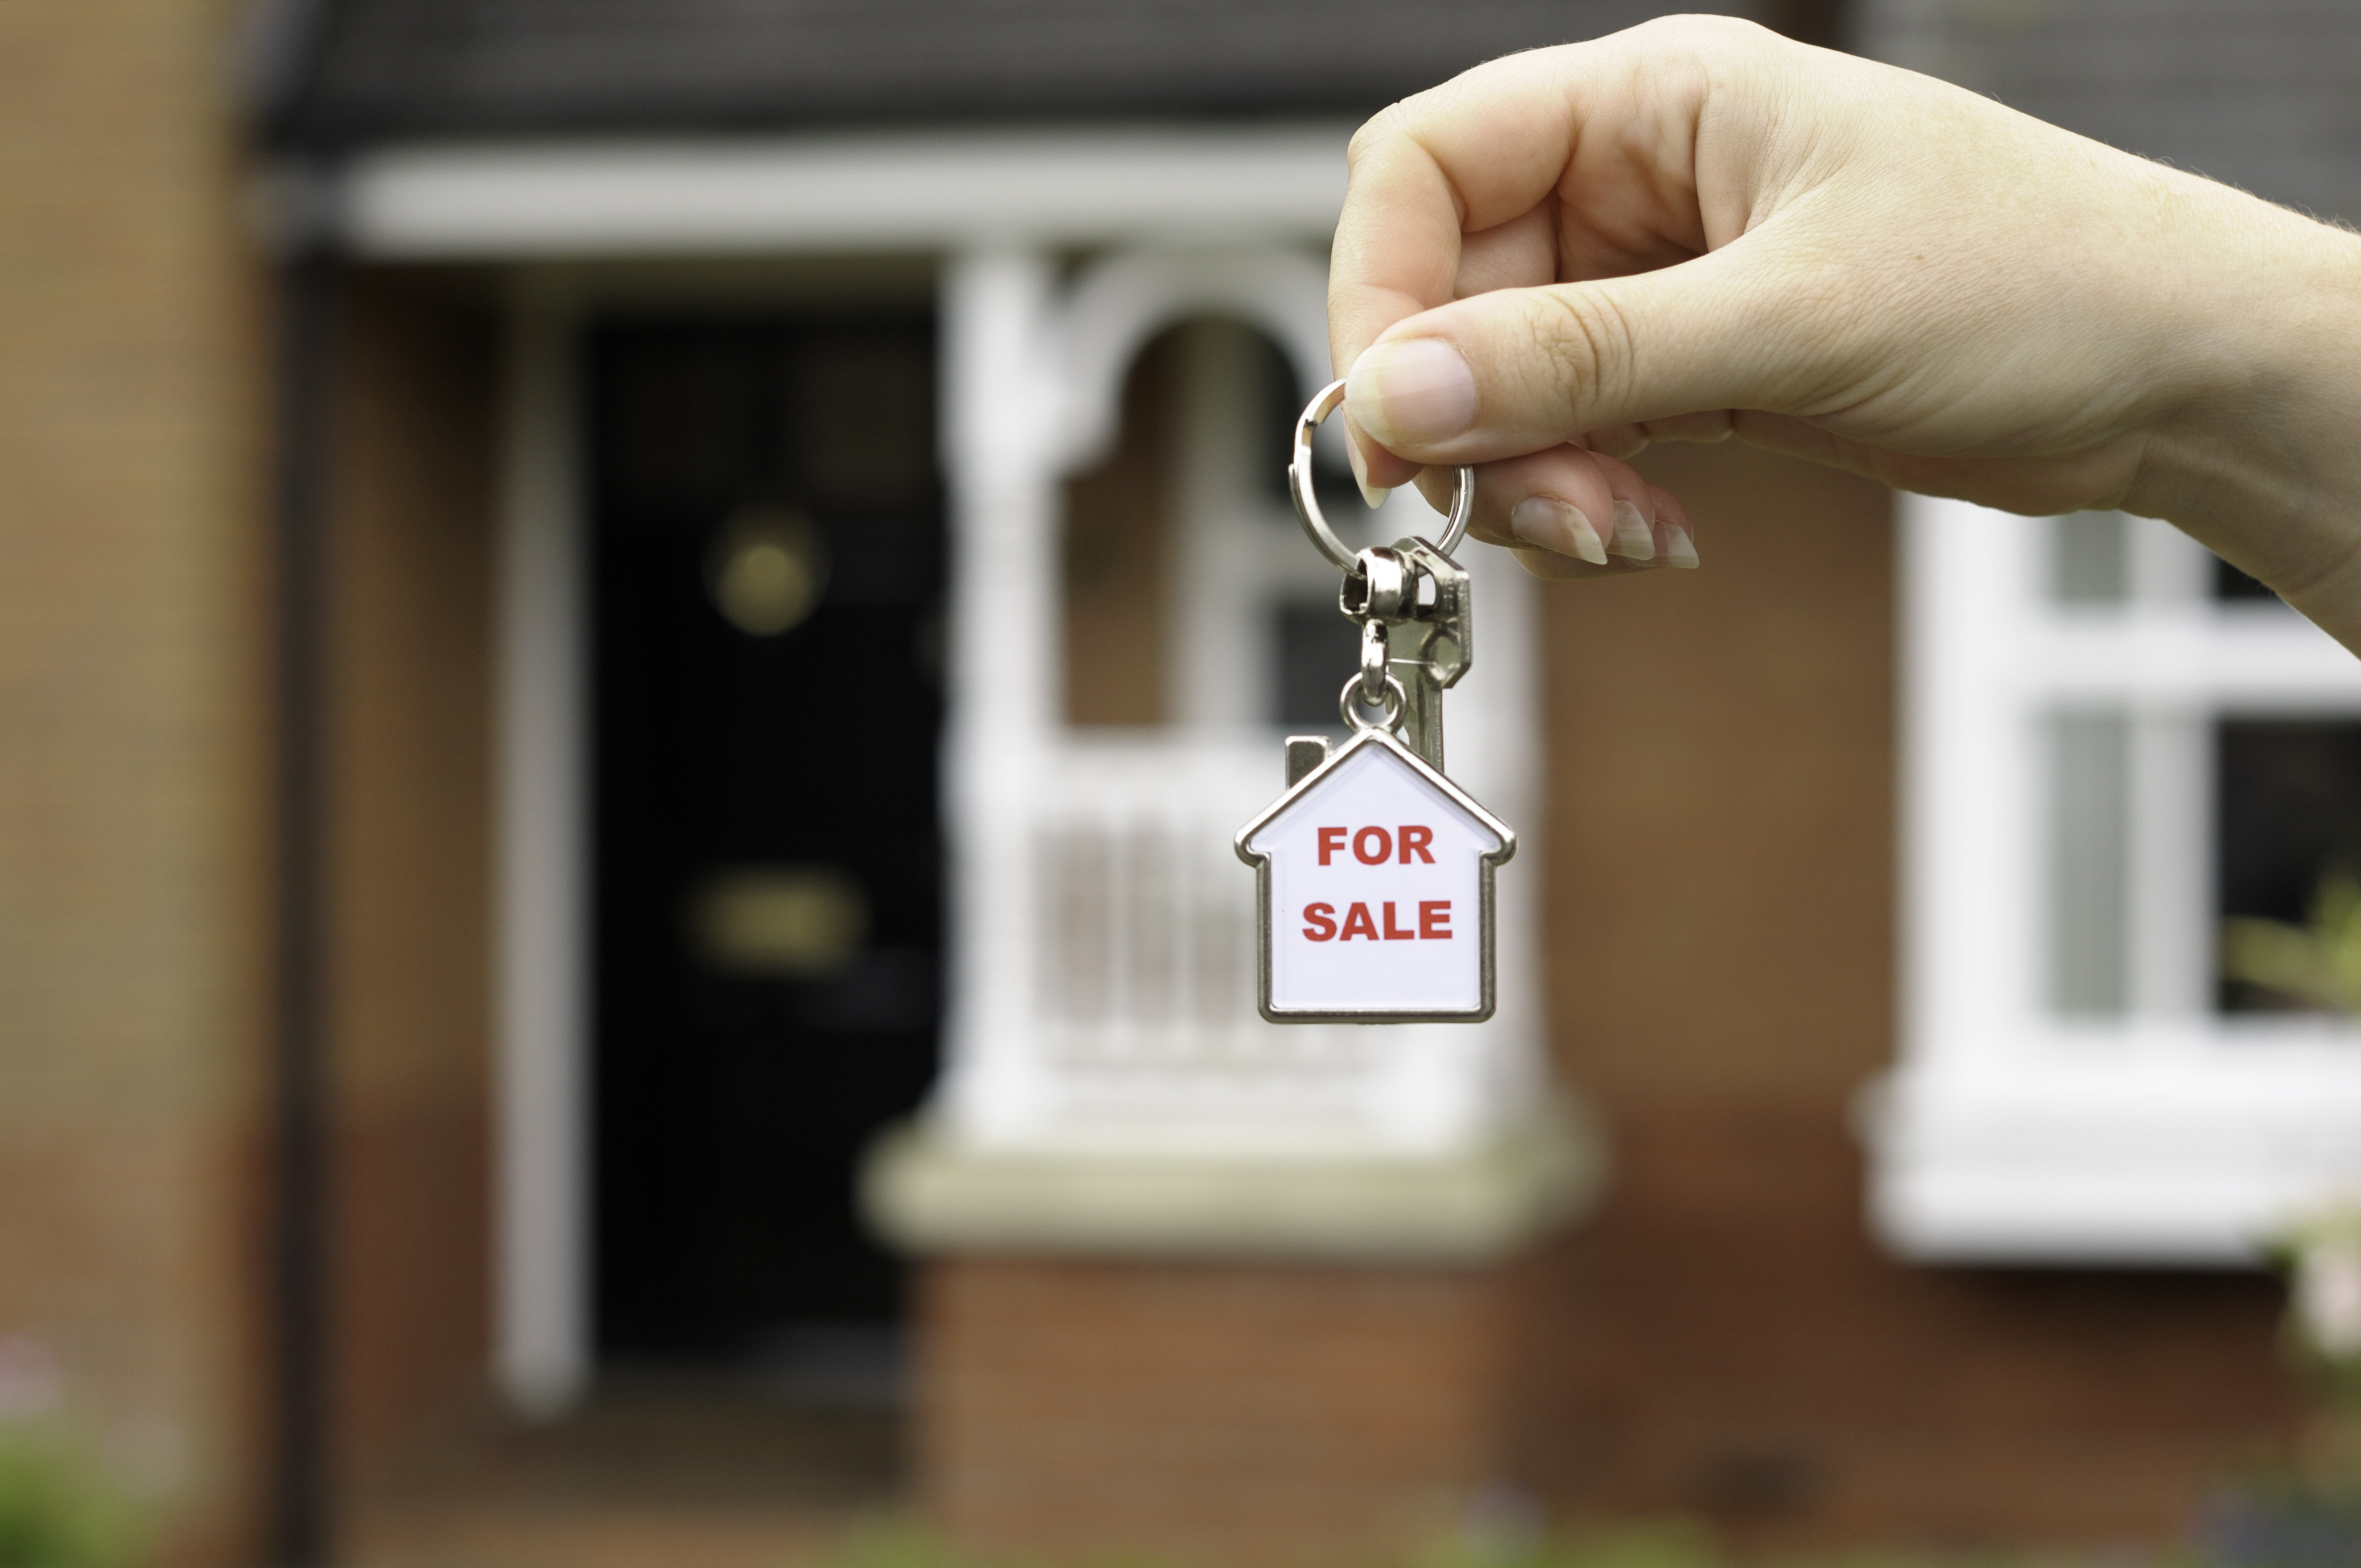 What You Really Need To Know Before You Pick A Real Estate Agent - HuffPost What You Really Need To Know Before You Pick A Real Estate Agent - 웹